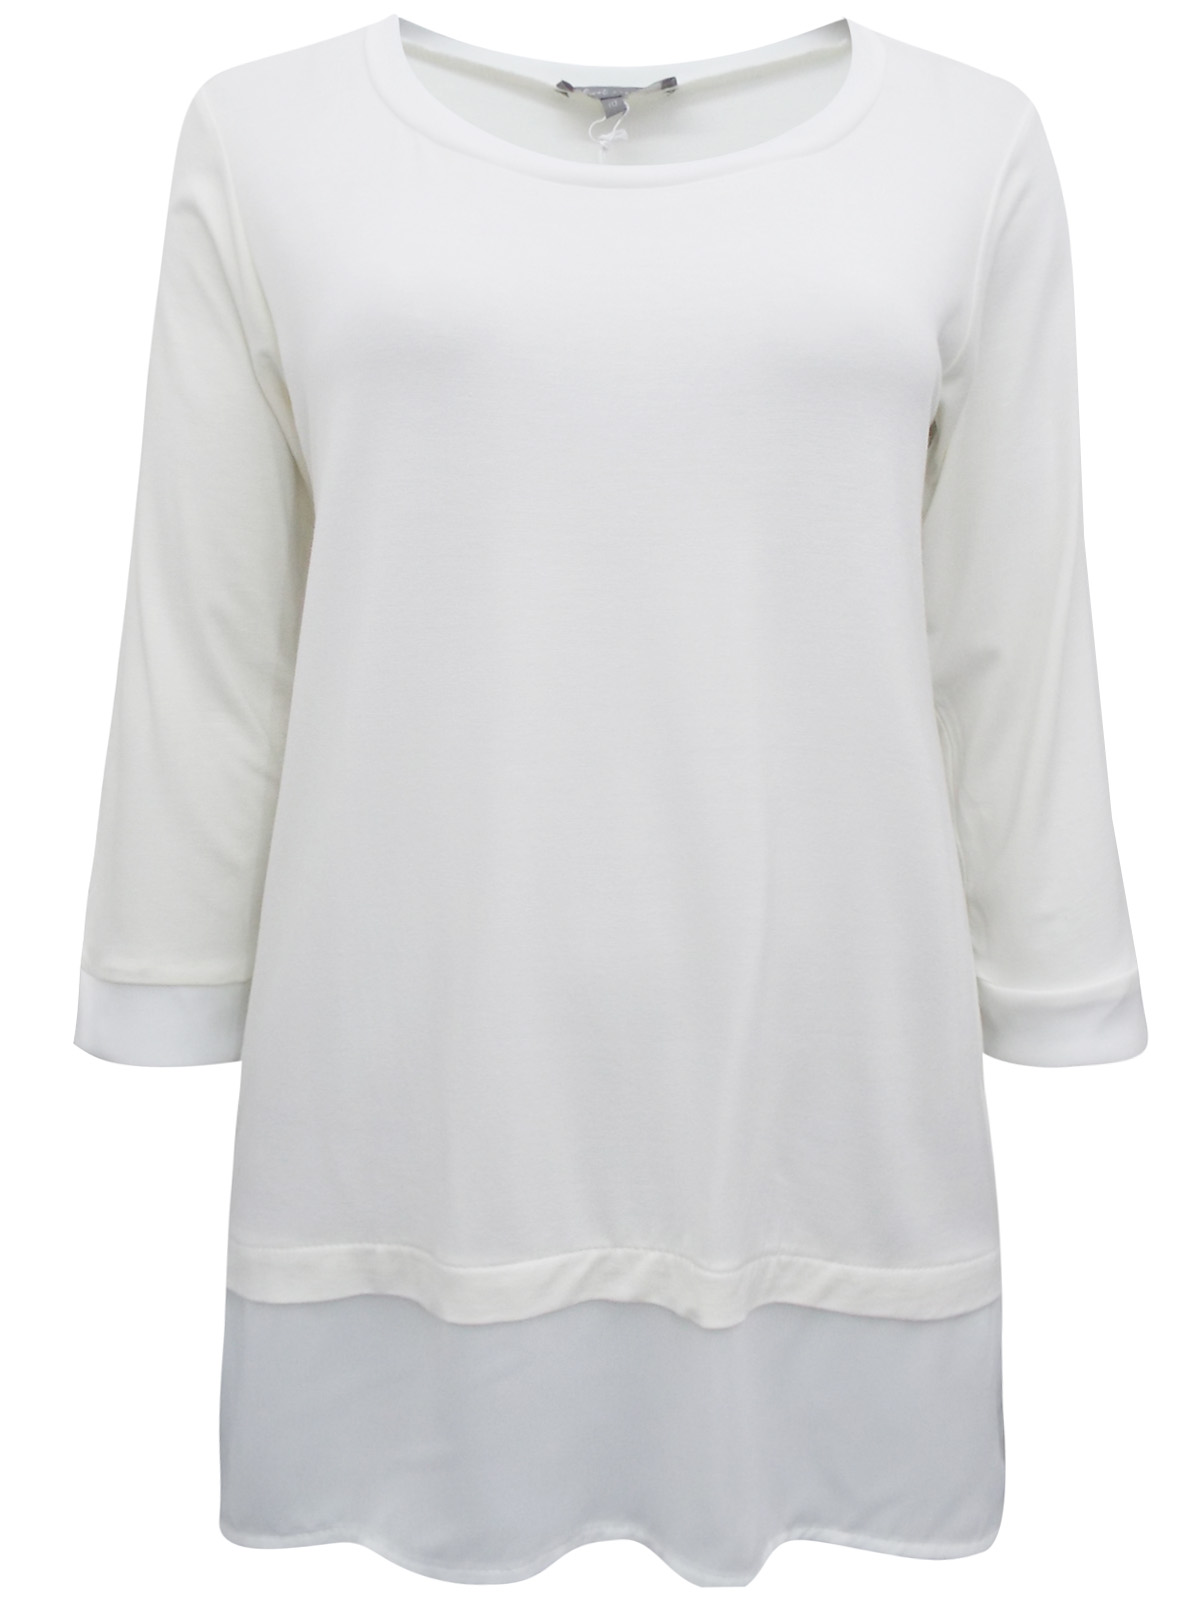 First Avenue CREAM 3/4 Sleeve Chiffon Panel Top - Size 10 to 20